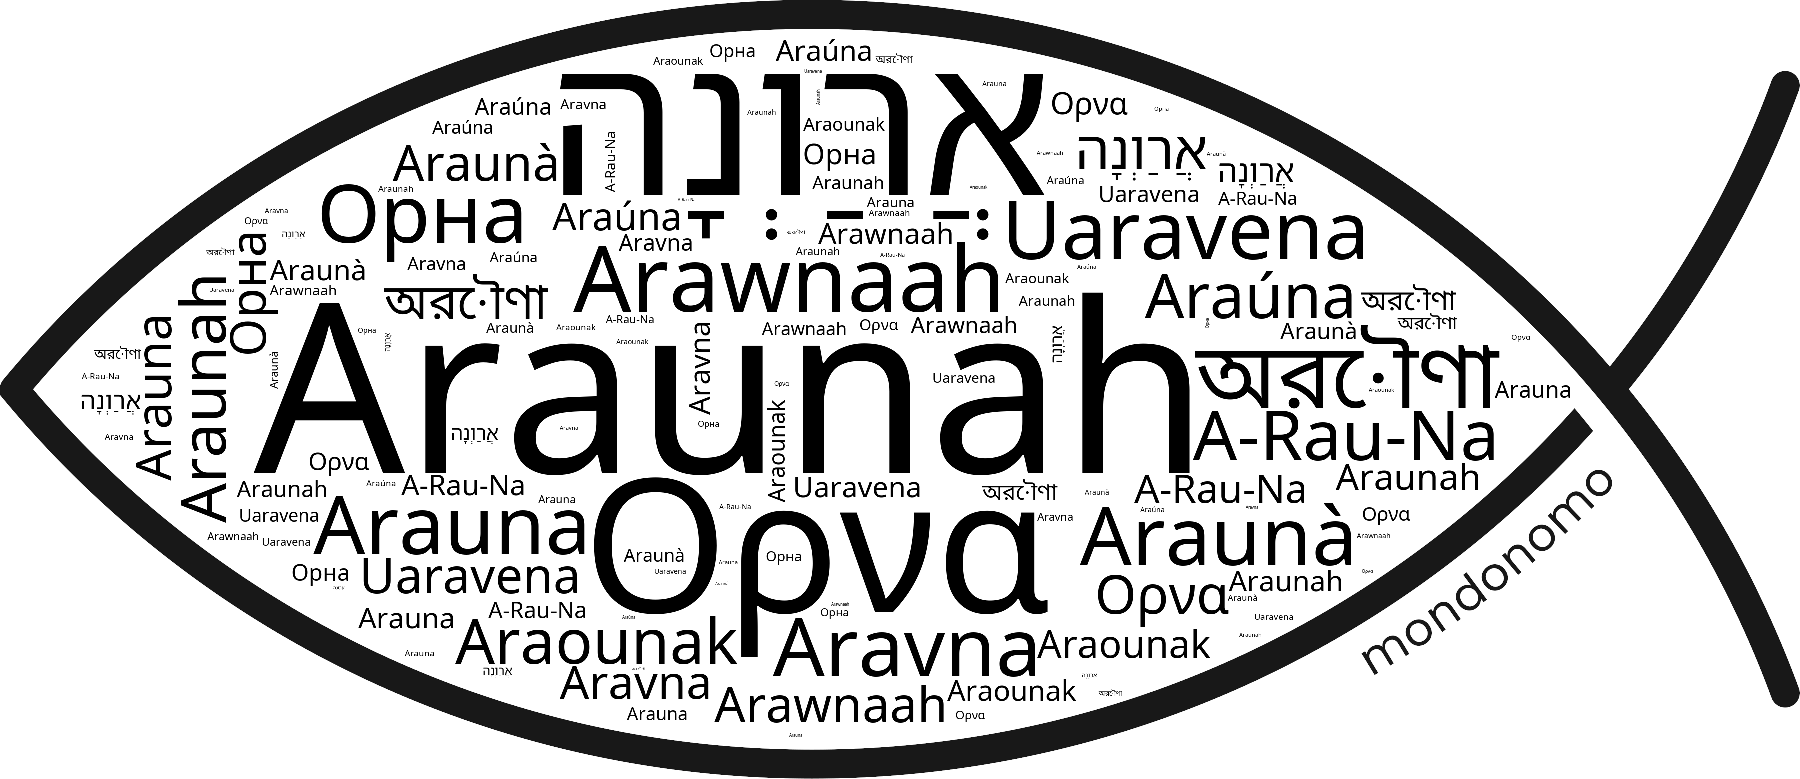 Name Araunah in the world's Bibles